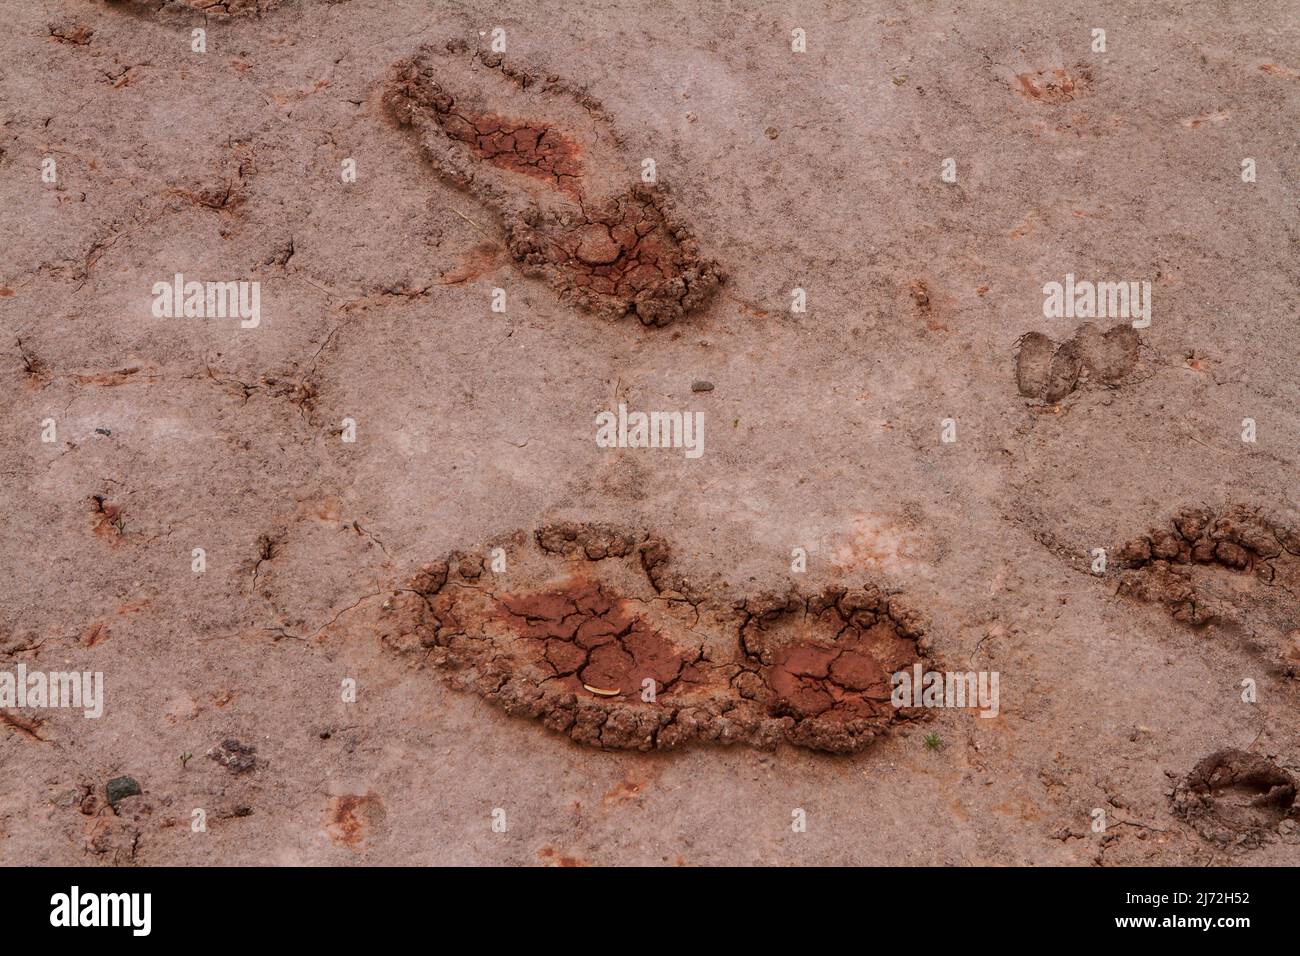 Human and deer footprints at the Painted Hills in Oregon (USA). Despite many signs and a Don’t Hurt the Dirt campaign, people still go off trail. Stock Photo